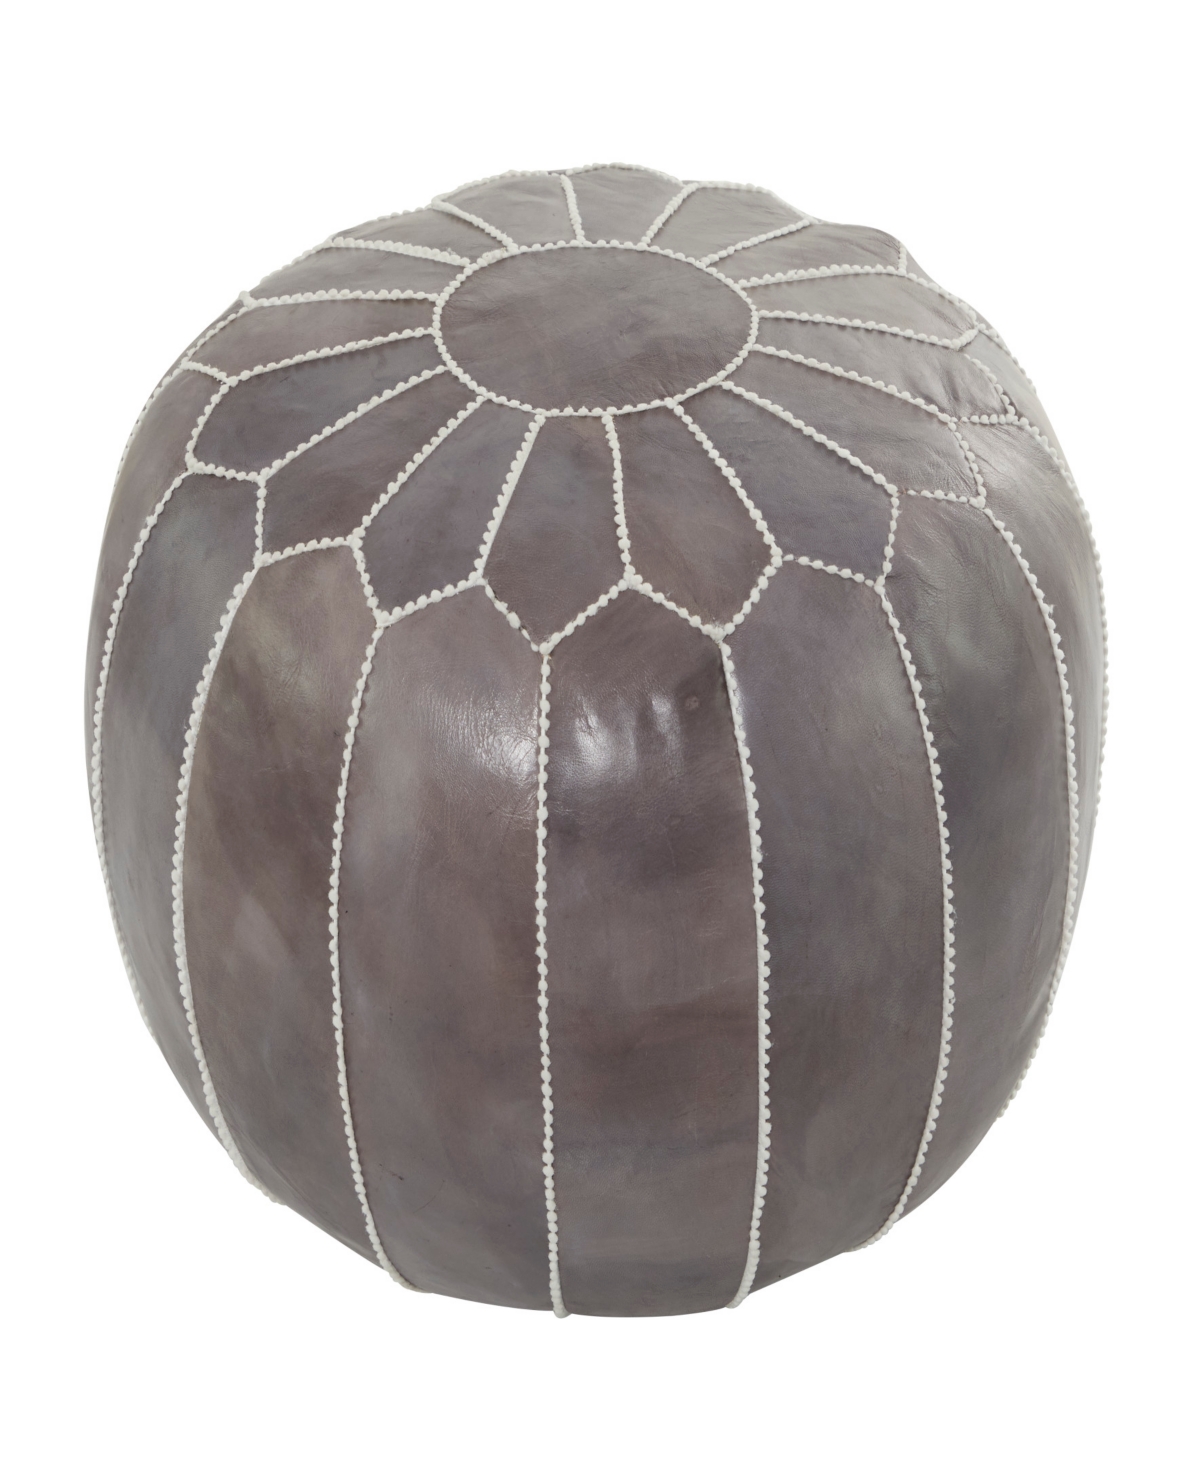 Rosemary Lane 24" X 24" X 18" Leather Moroccan Floral Stitching Pouf In Gray